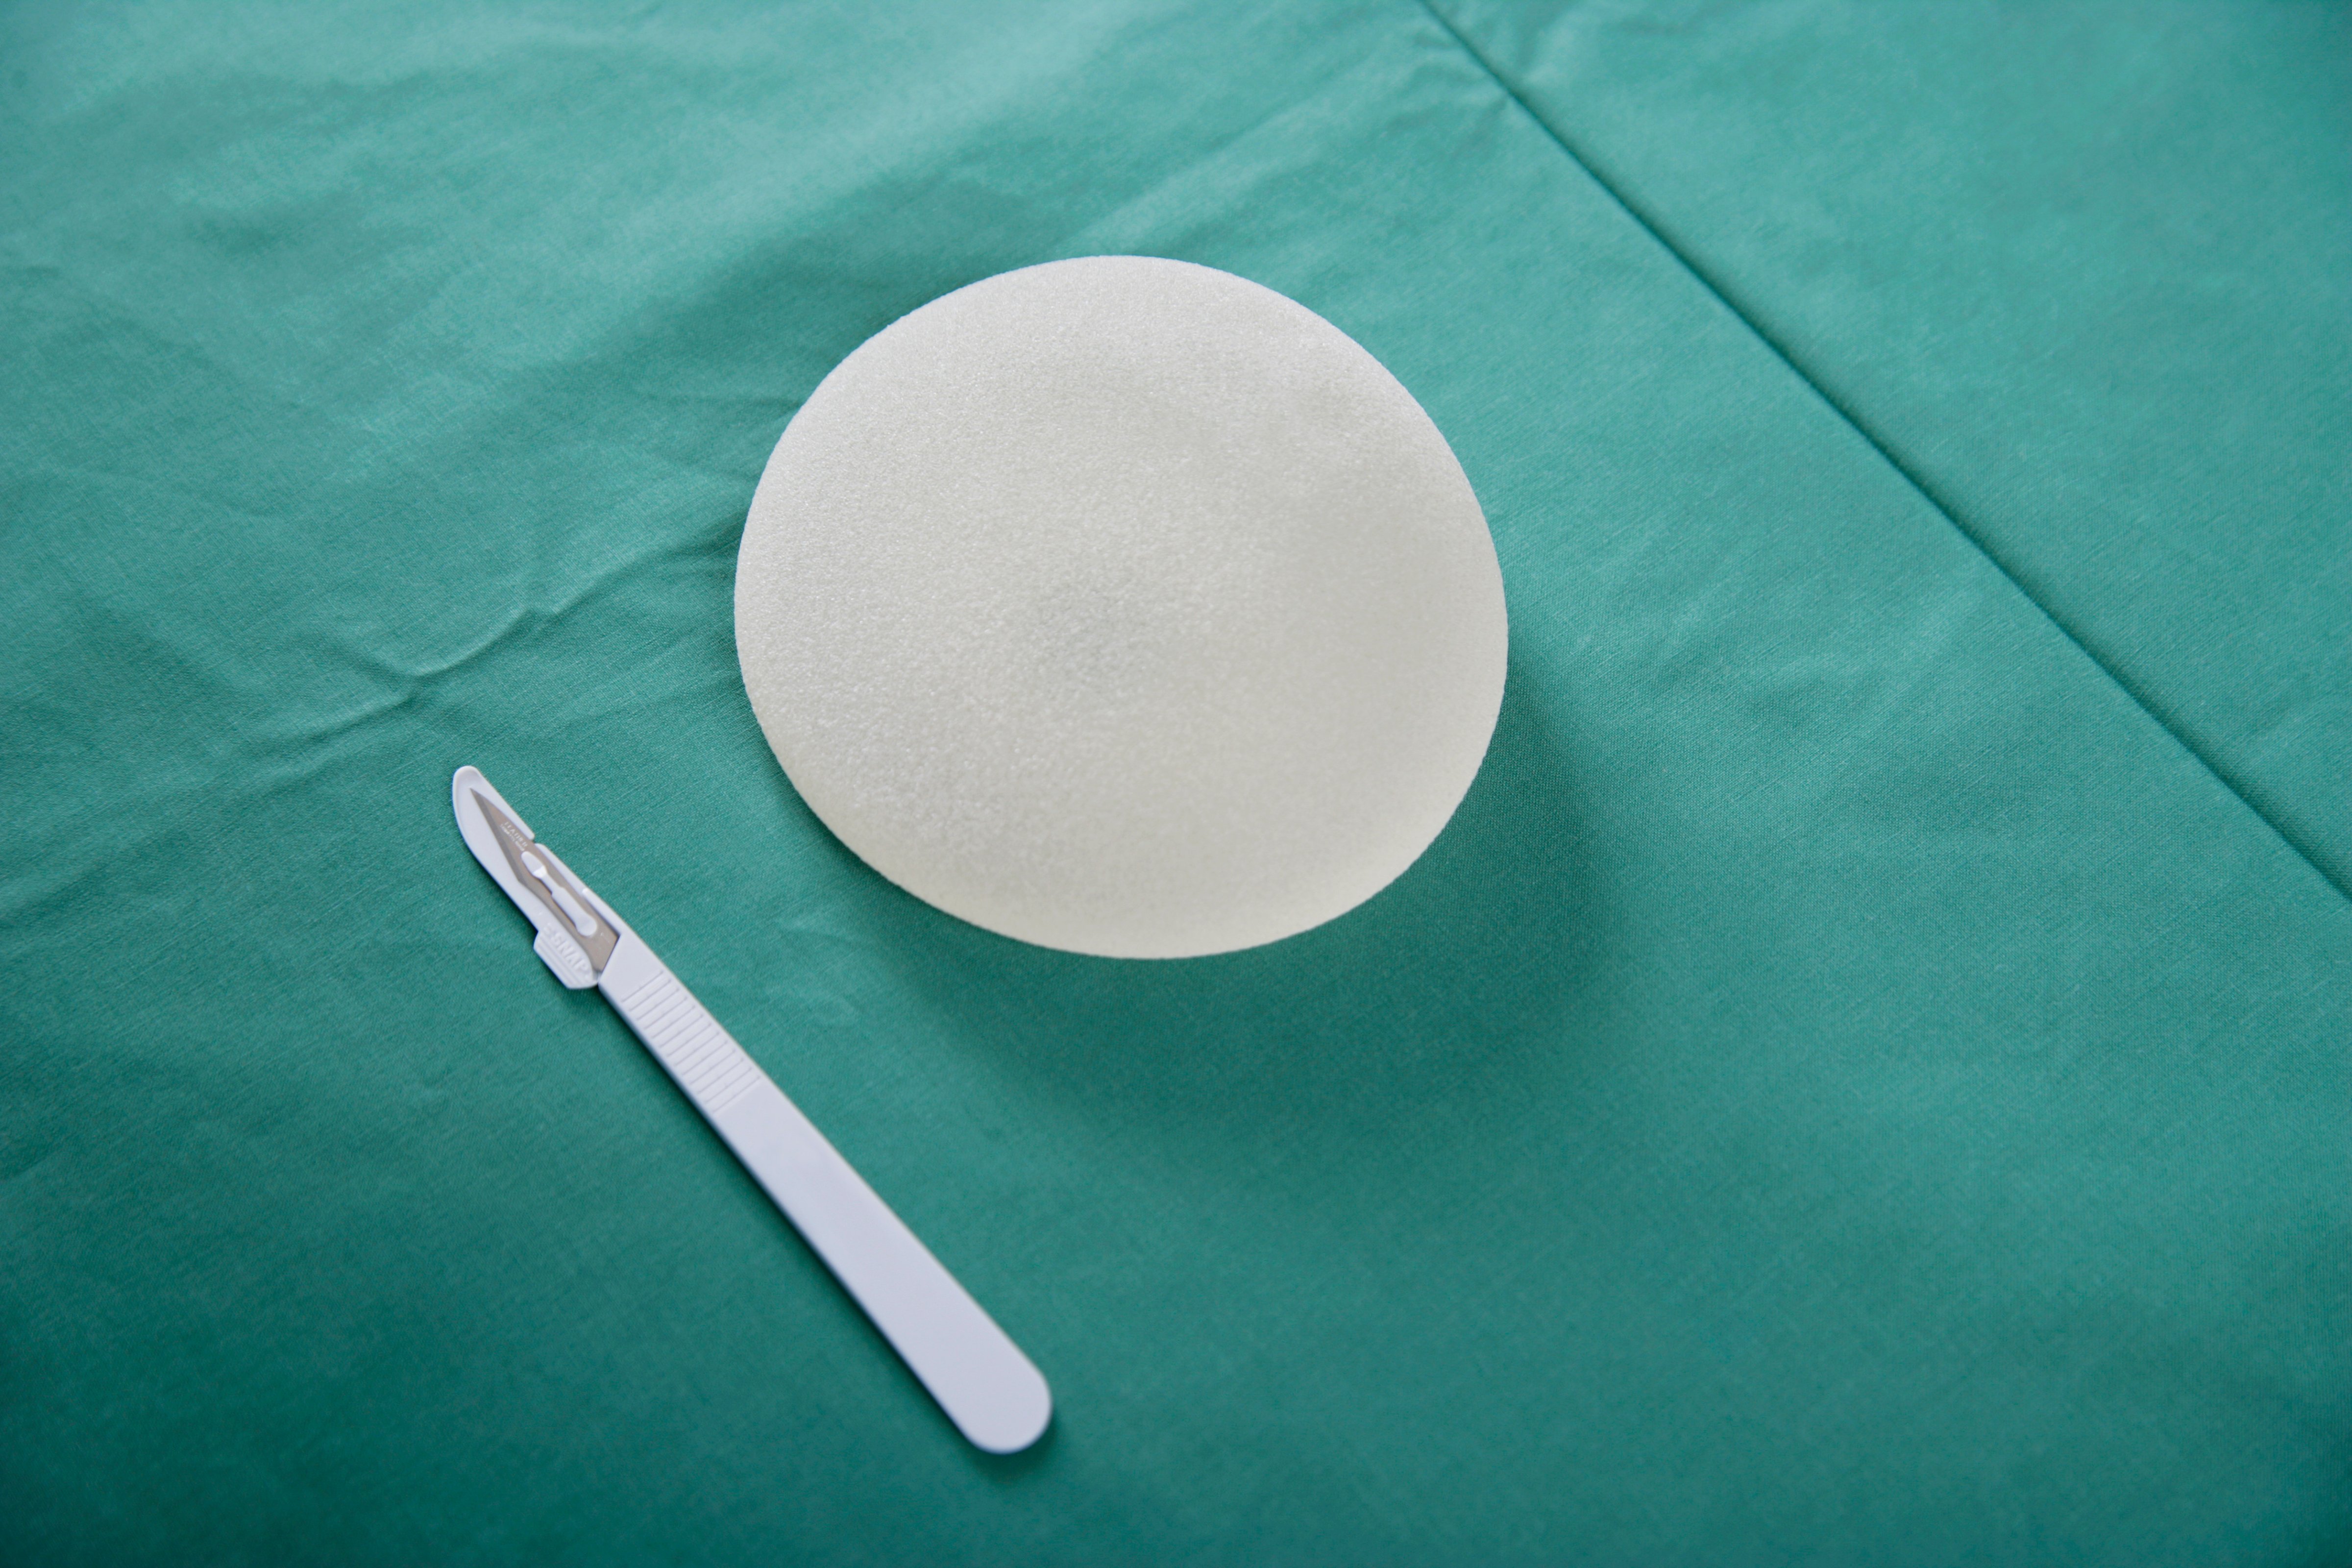 A breast implant and scalpel